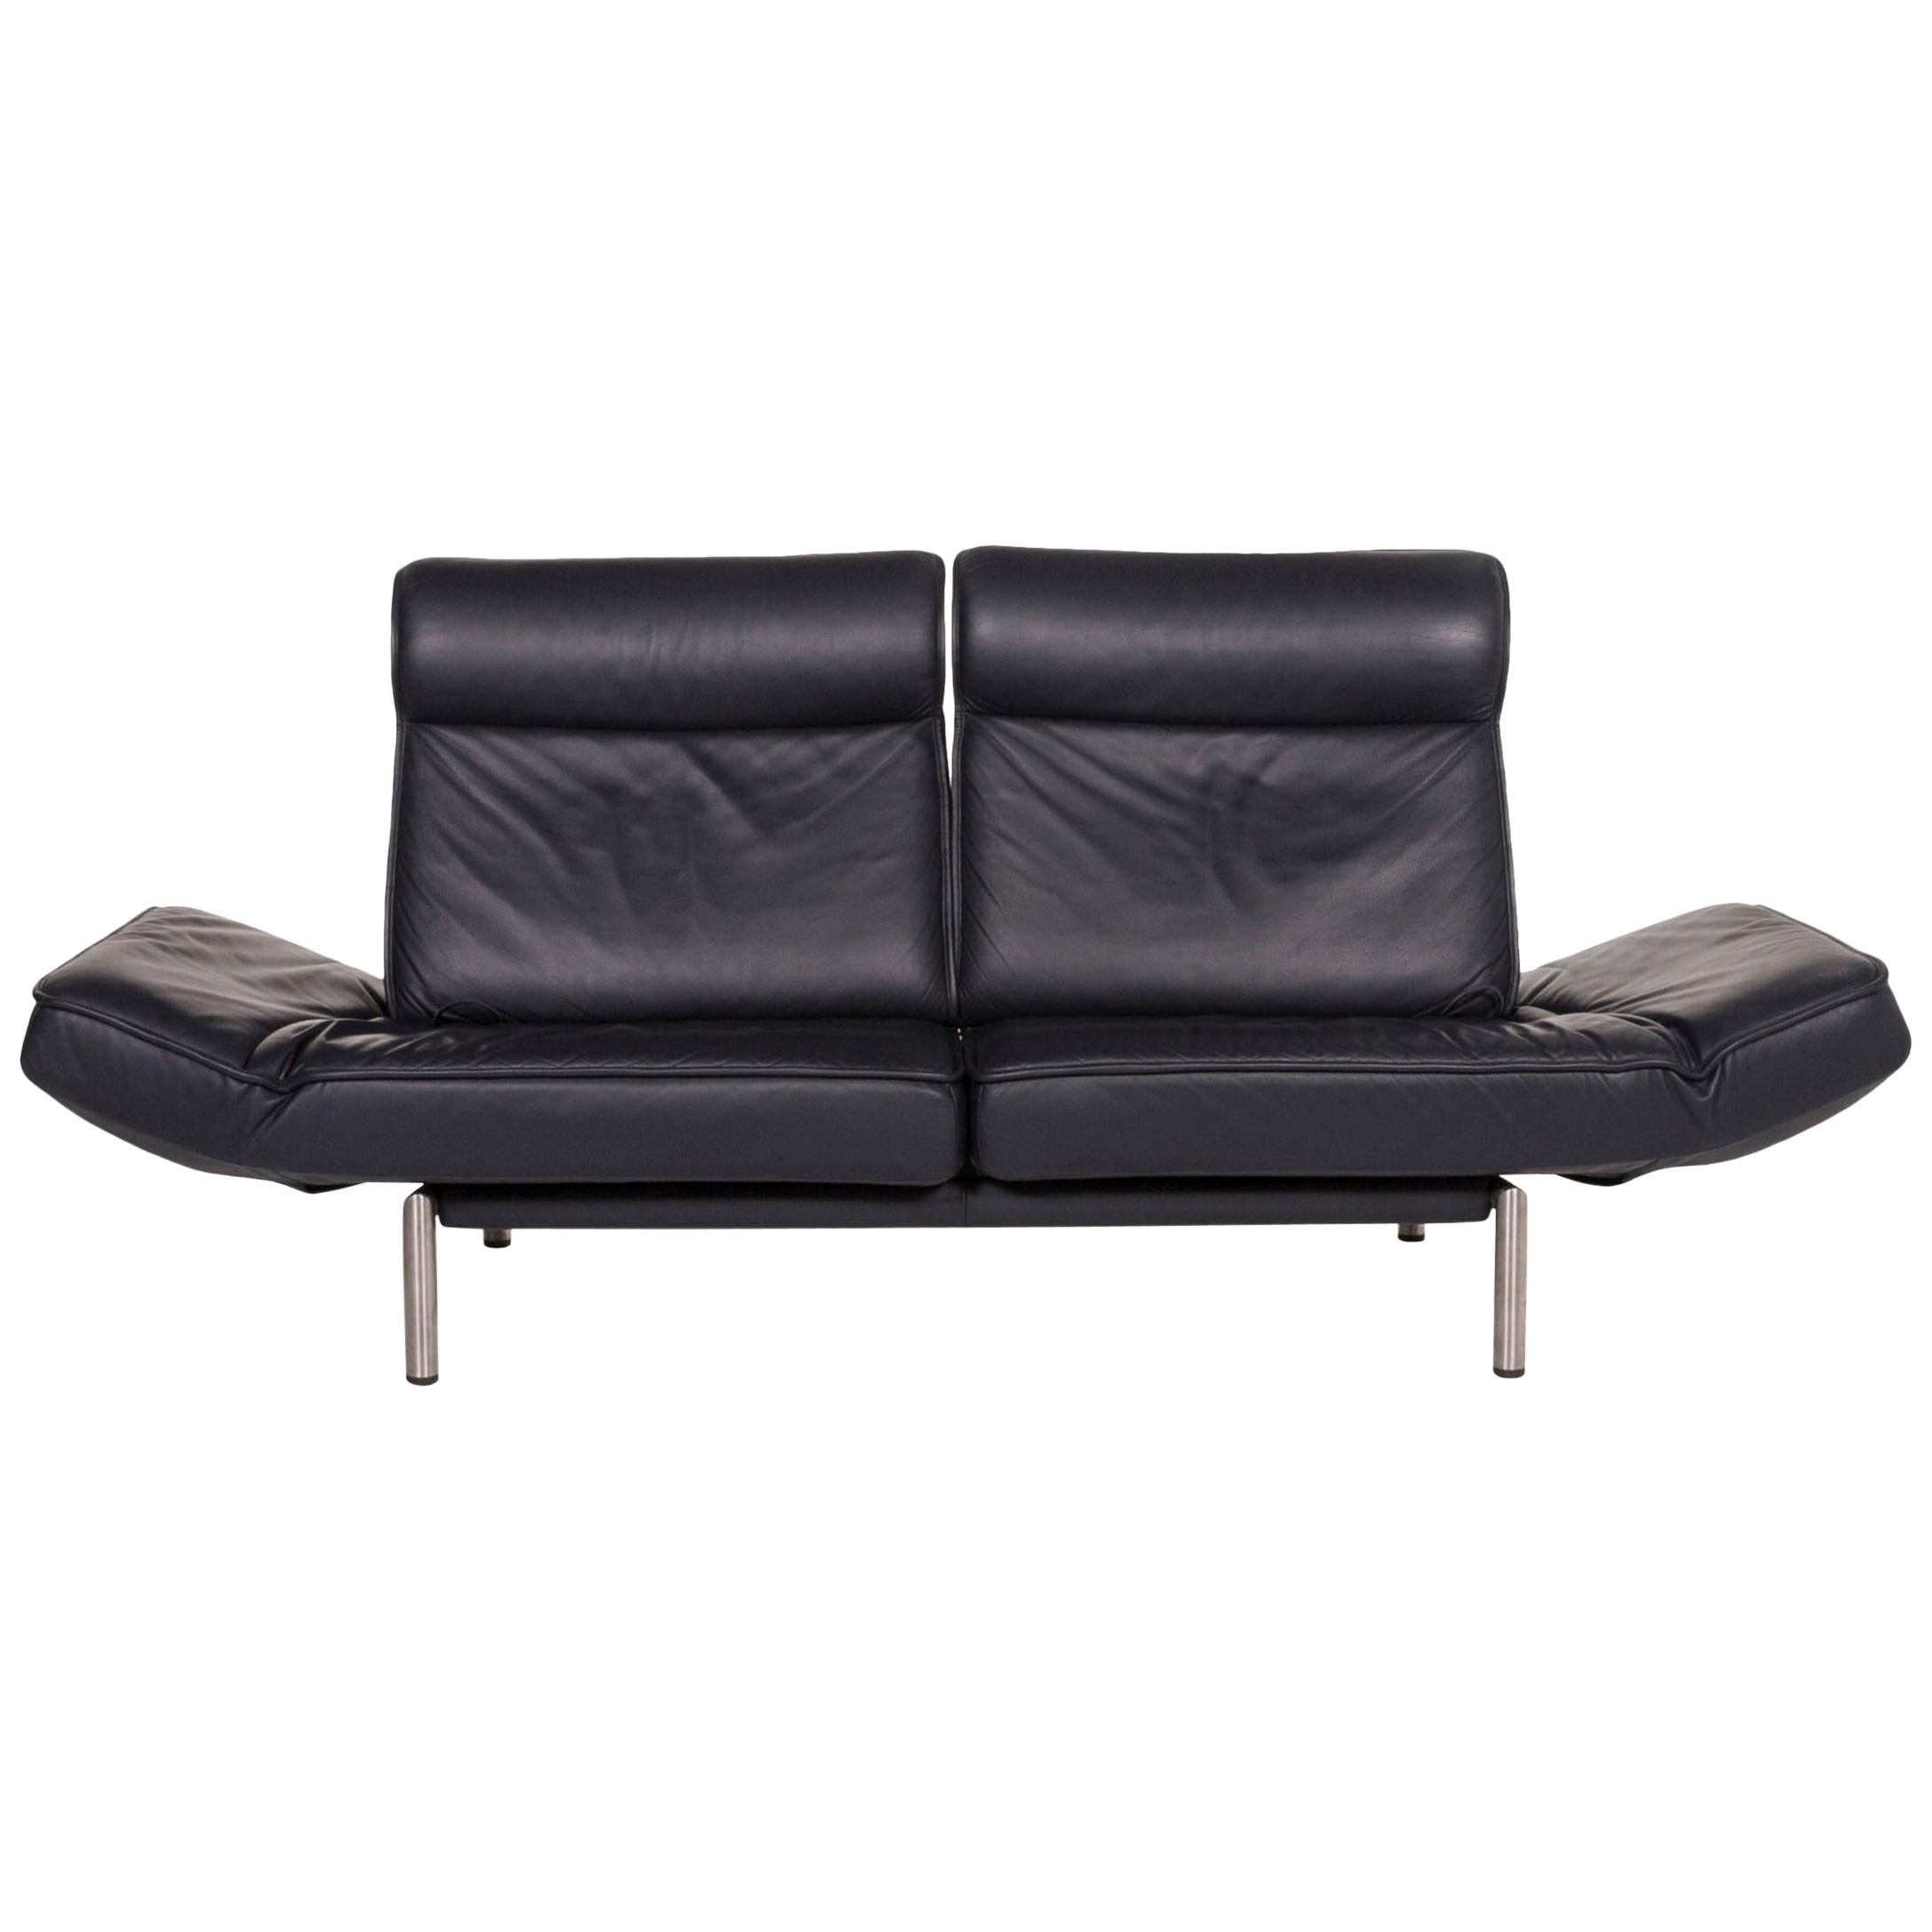 De Sede Ds 450 Leather Sofa Blue Dark Blue Two-Seat Function Relax Function